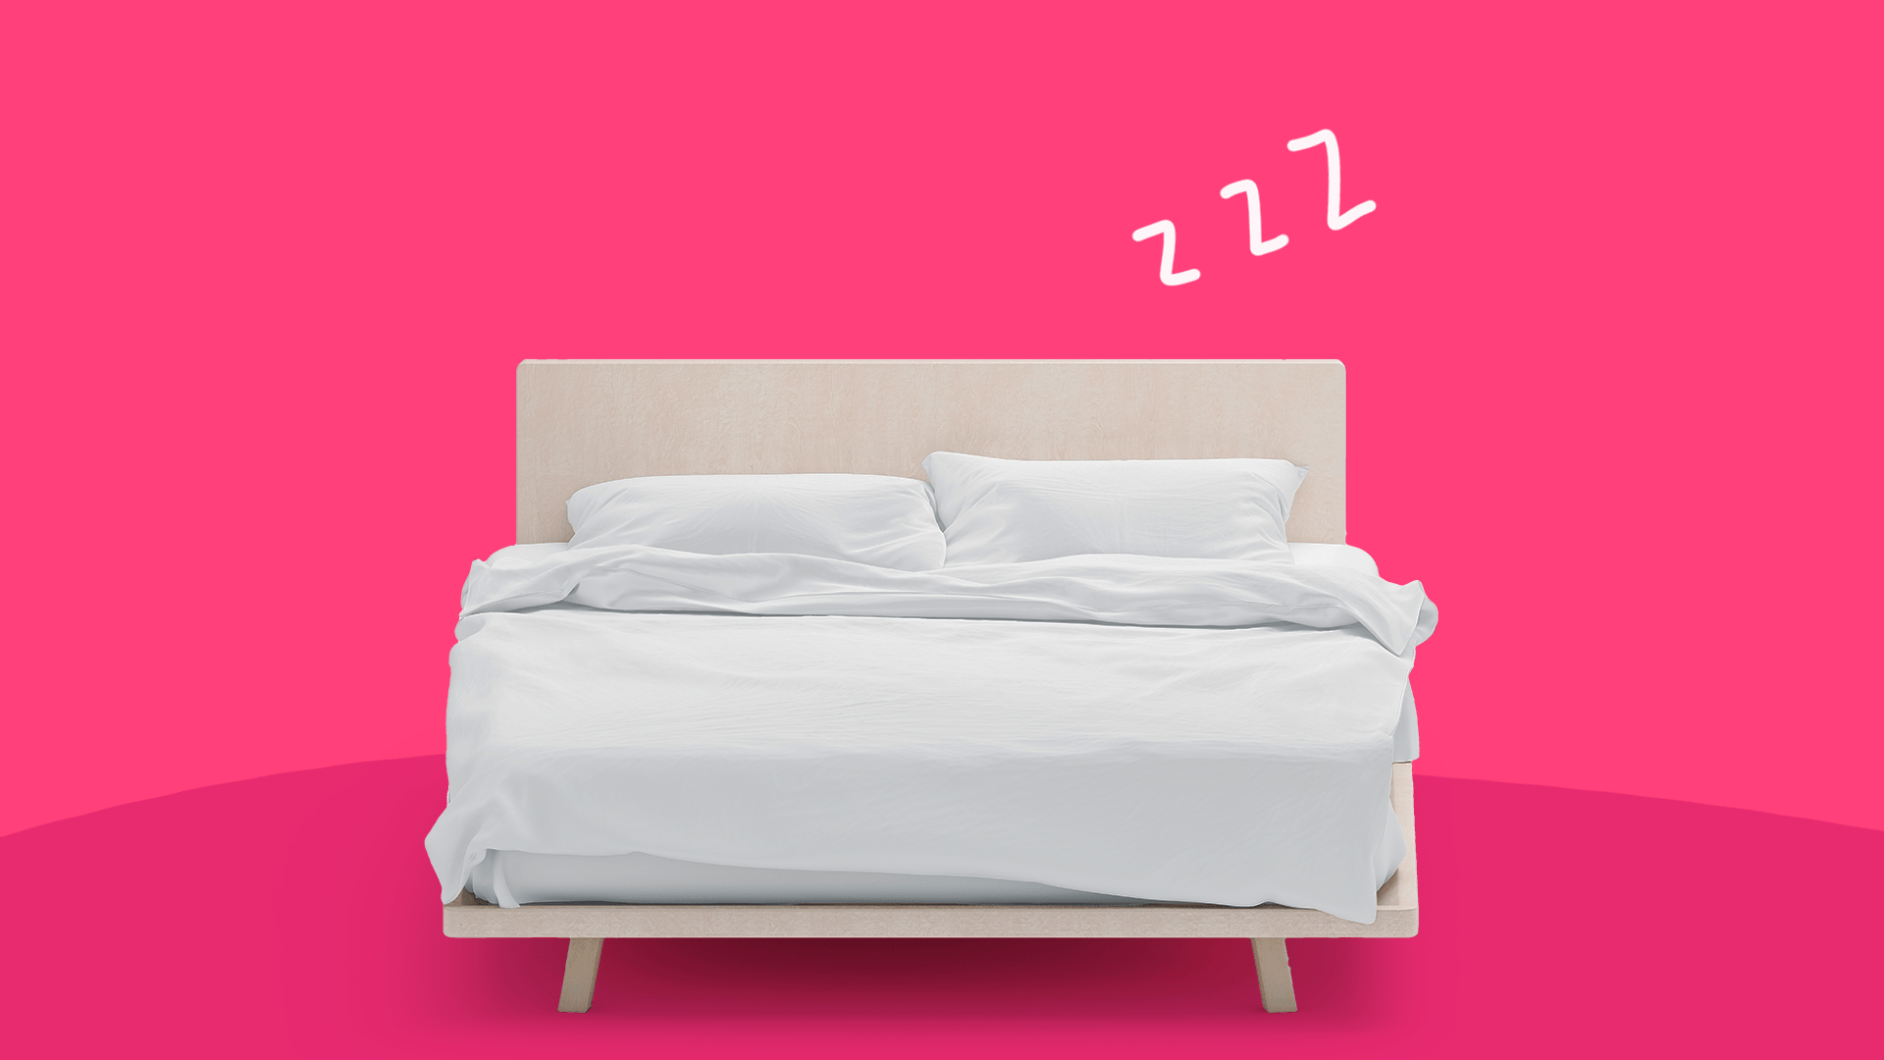 Bed with white linens: Best way to sleep